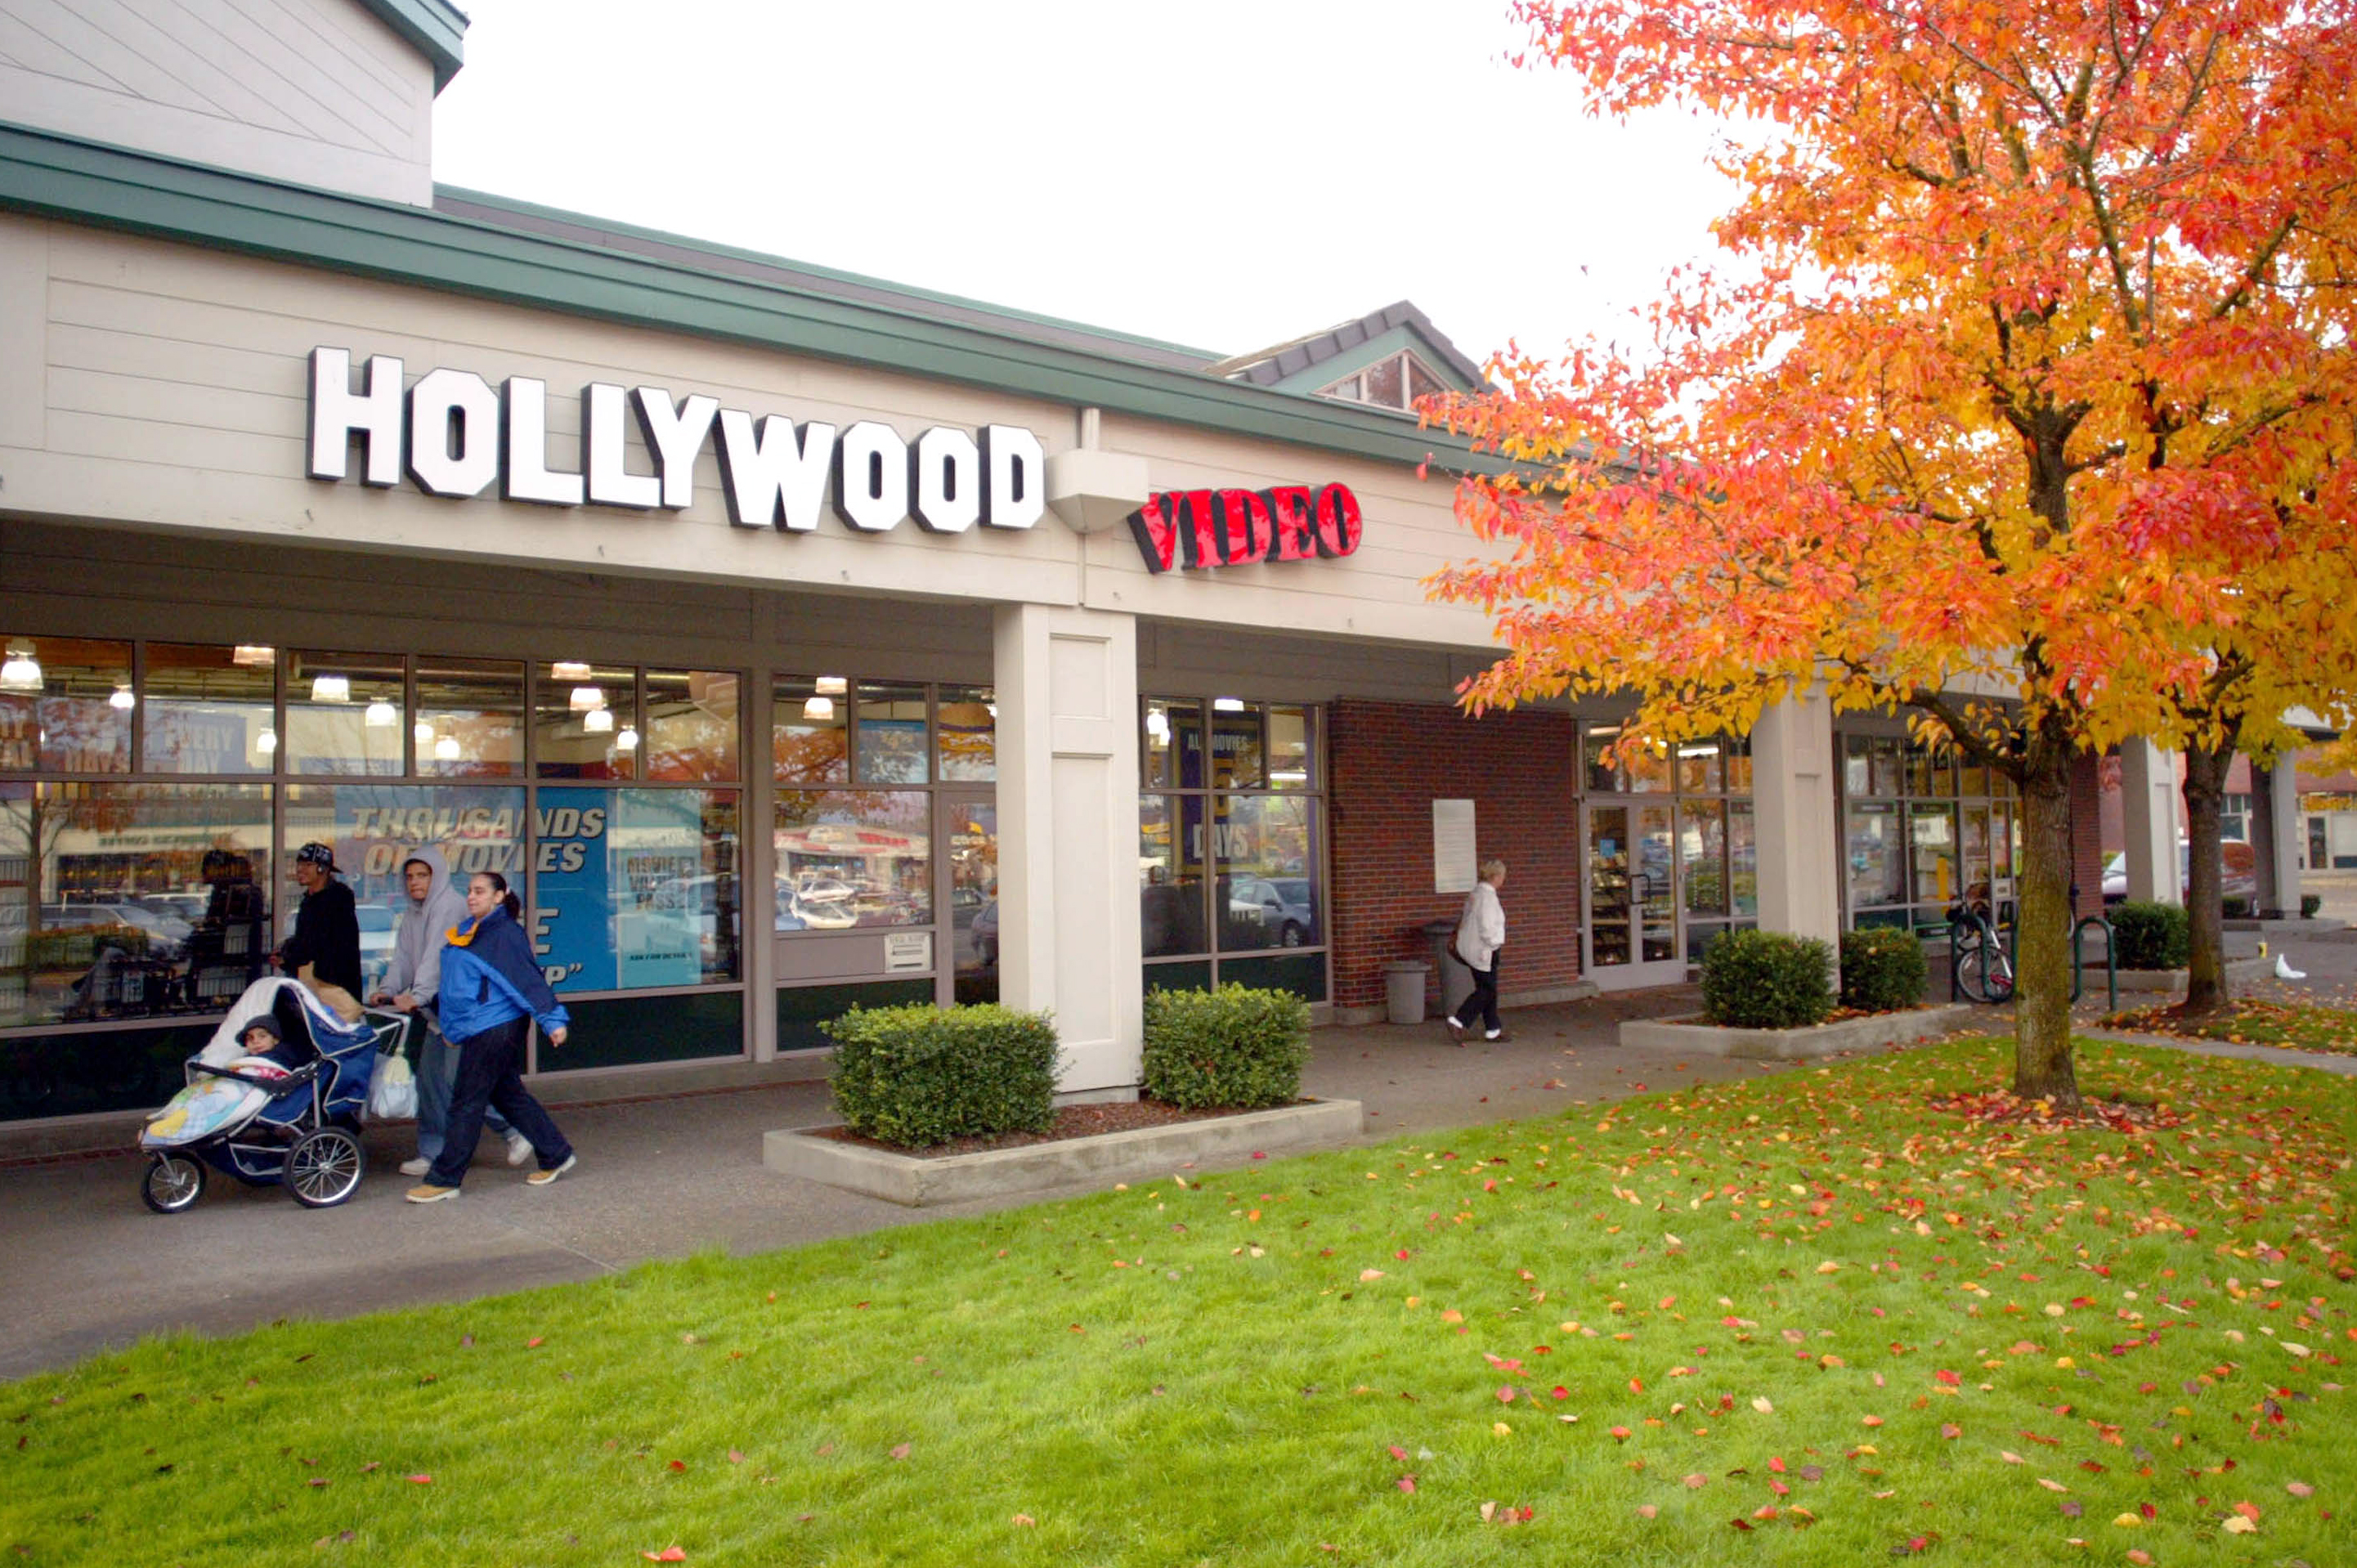 No. 2 rental chain Hollywood Video to close